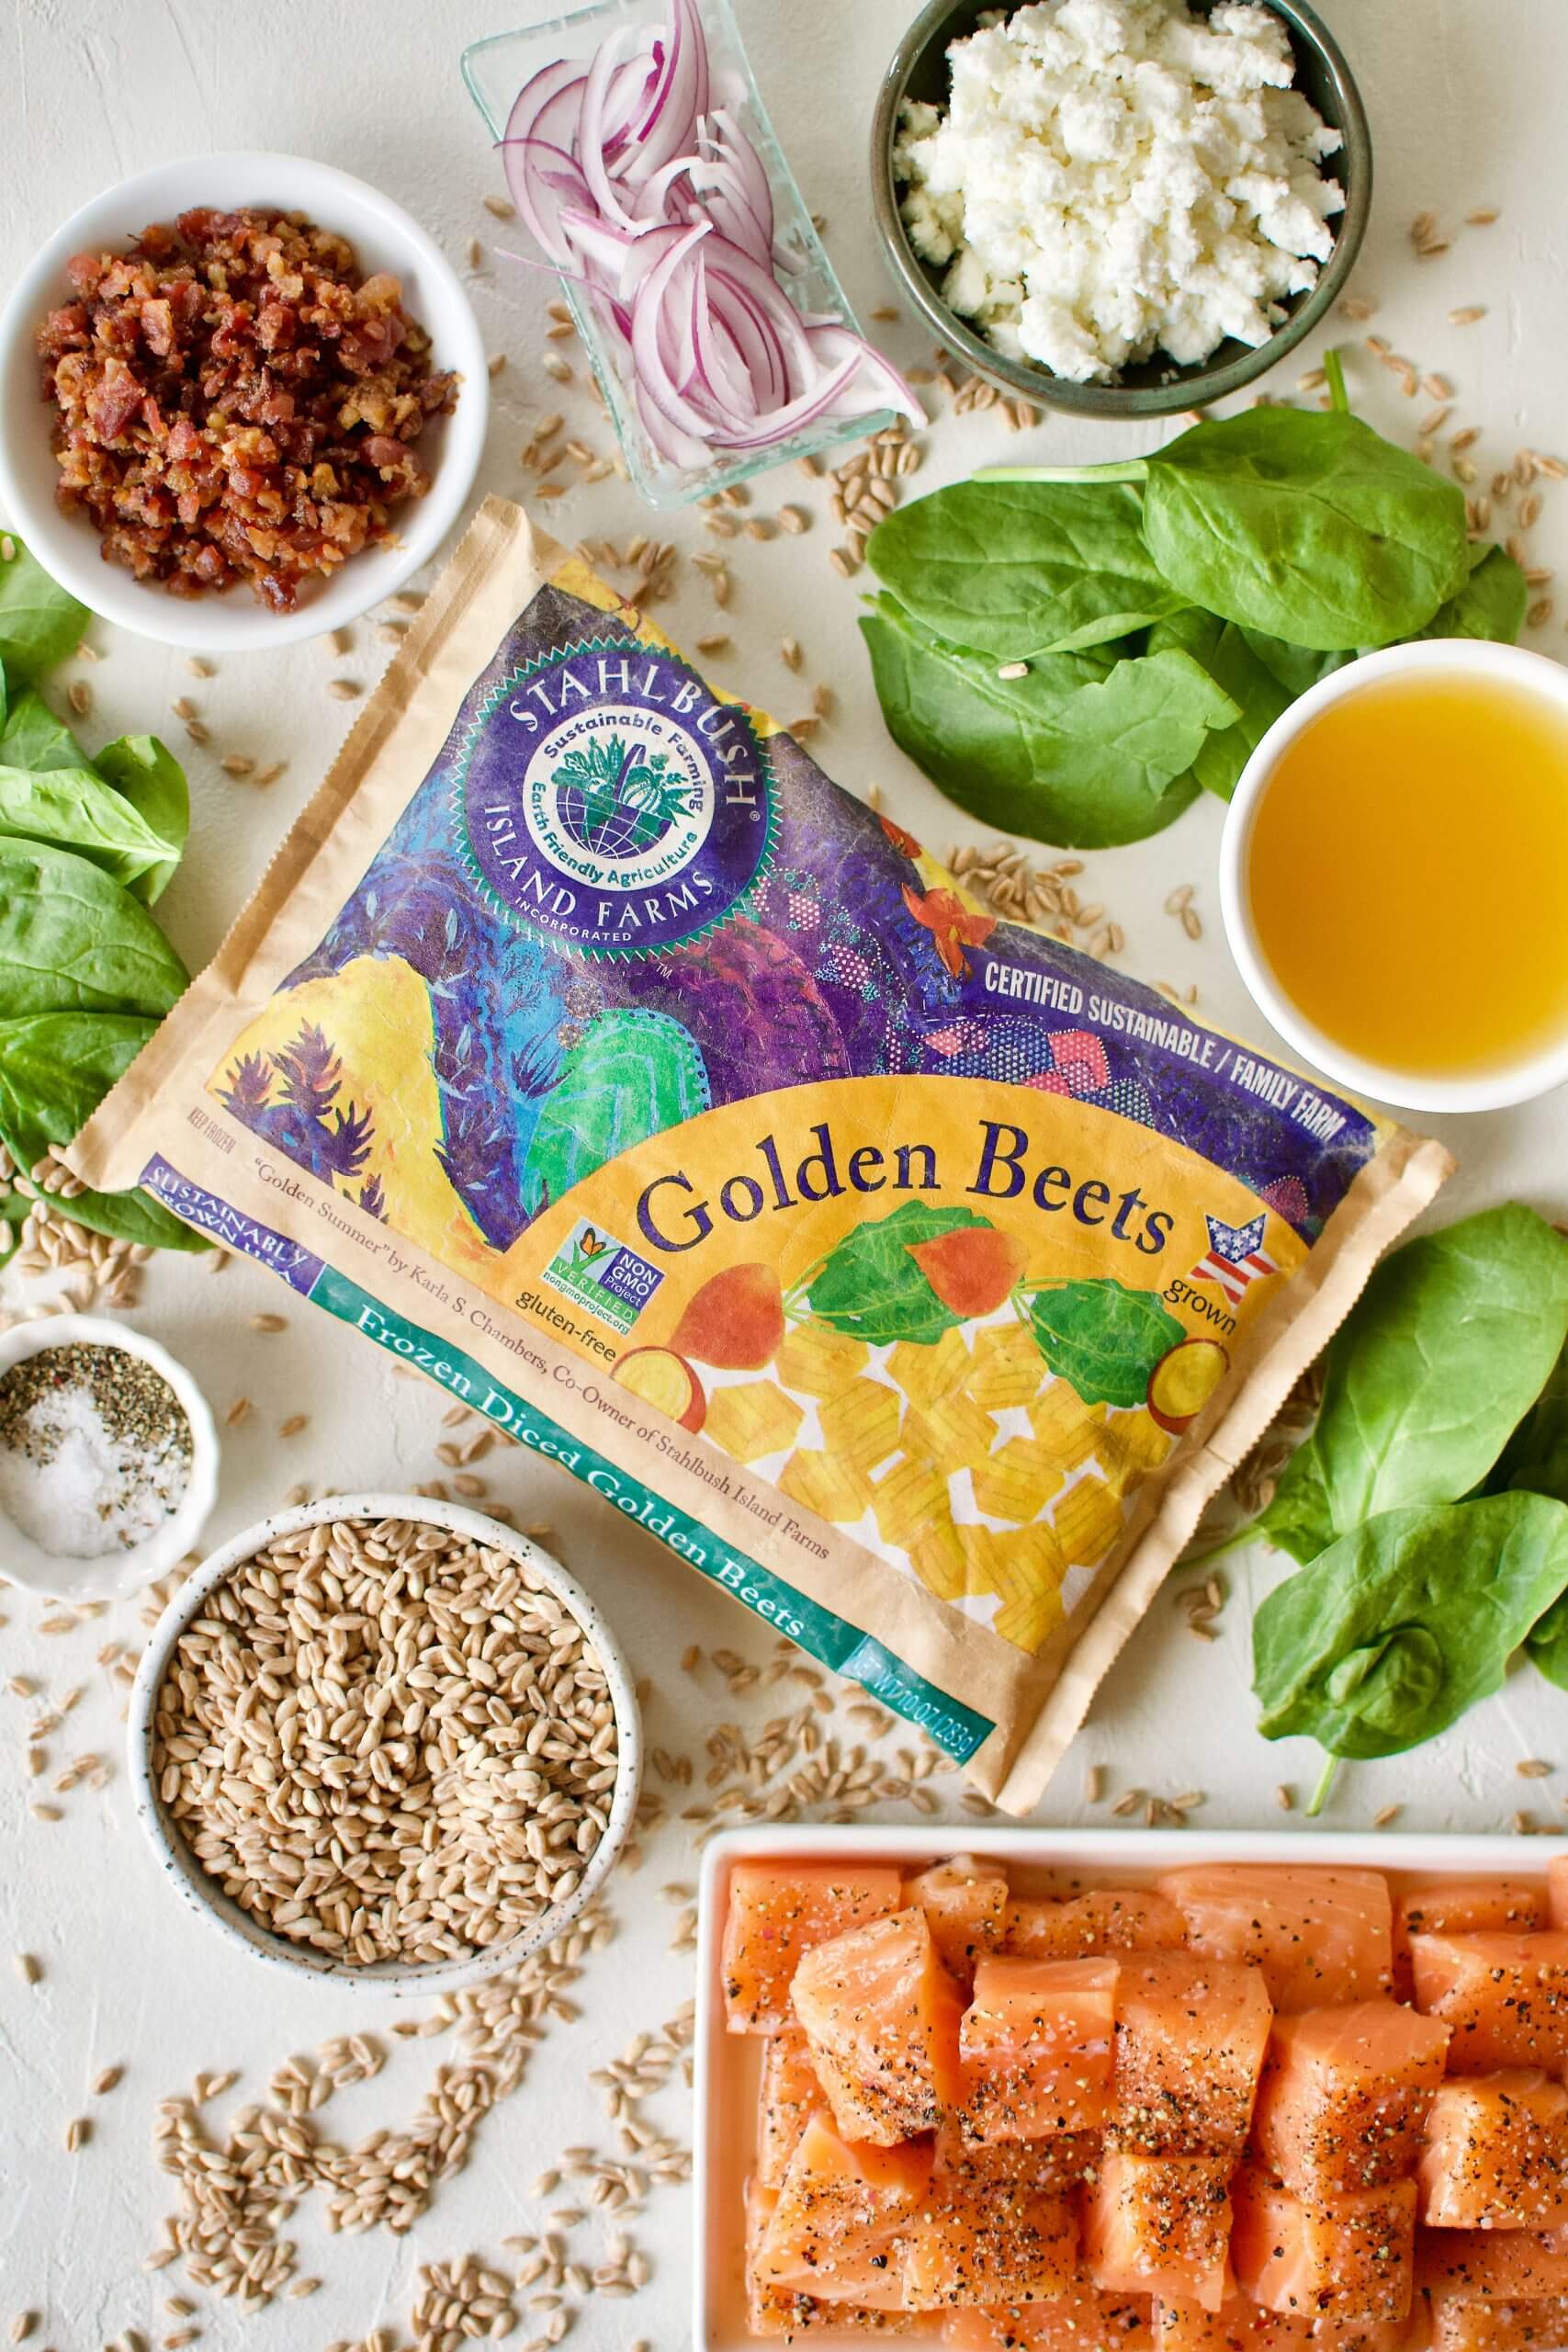 Golden Beet and Farro Salad with Spinach and Bacon Stahlbush Island Farms Frozen Golden Beets